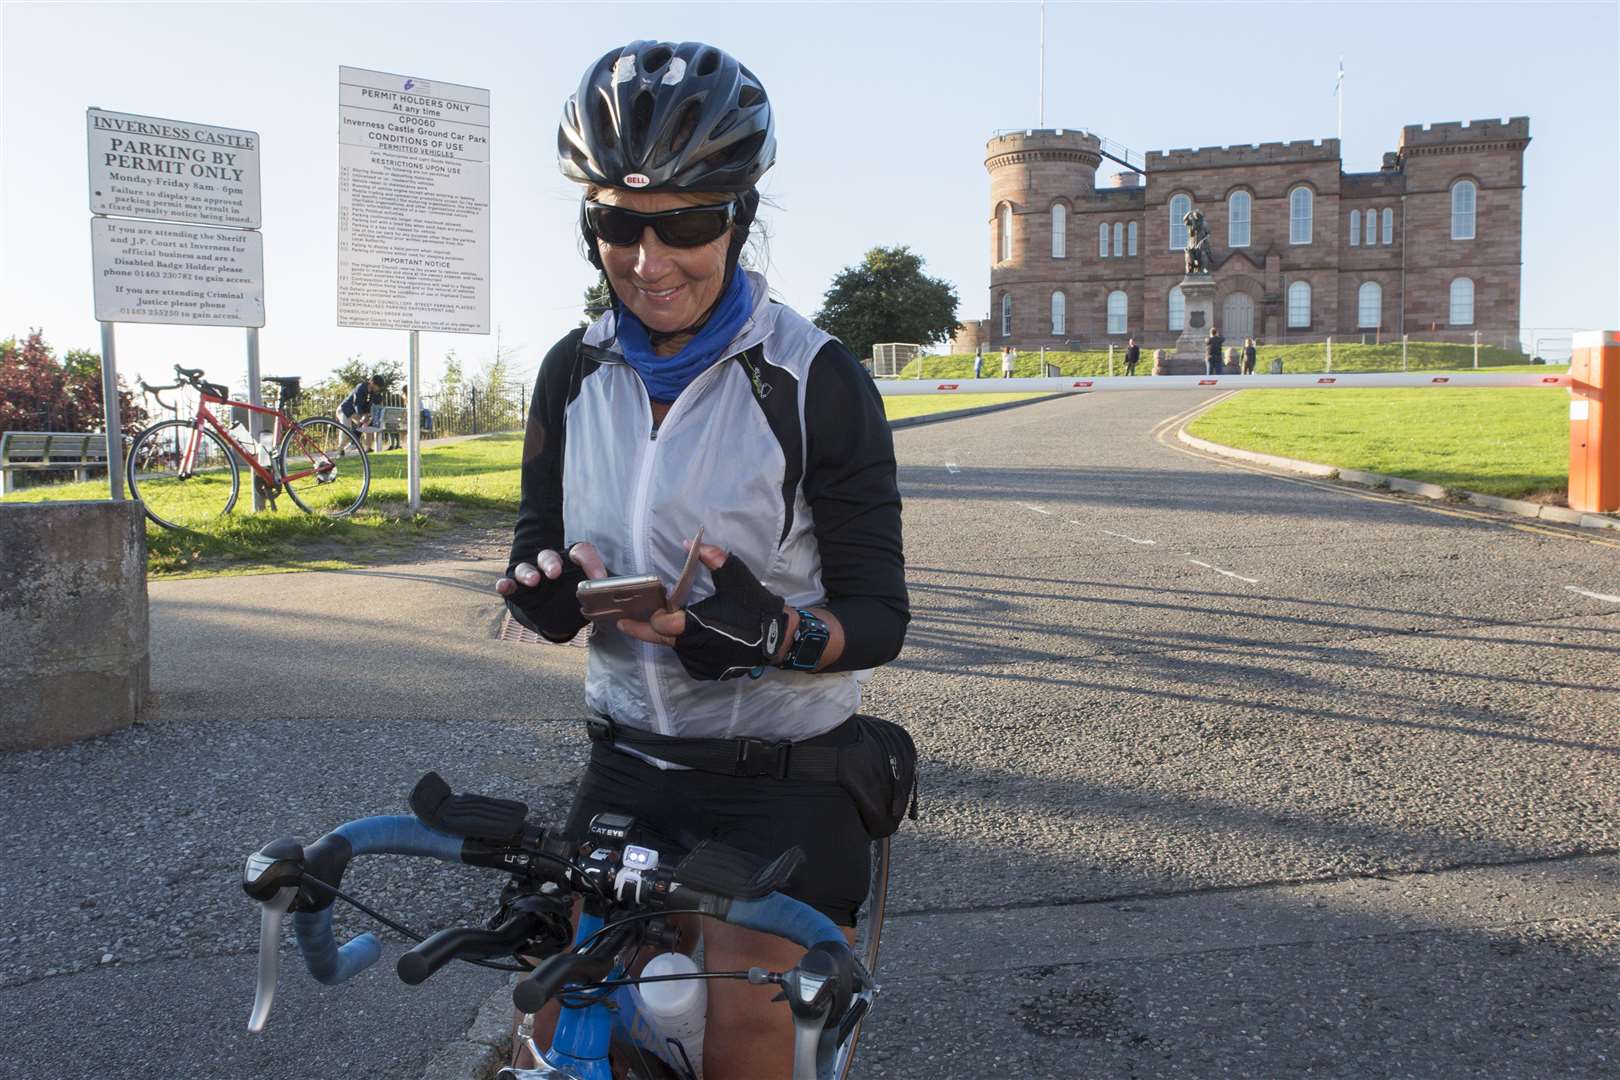 Arriving in Inverness at 6.21pm, Lorna updates her social media as she completes the NC500 cycle part of her ultra duathlon. Picture: Robert MacDonald / Northern Studios